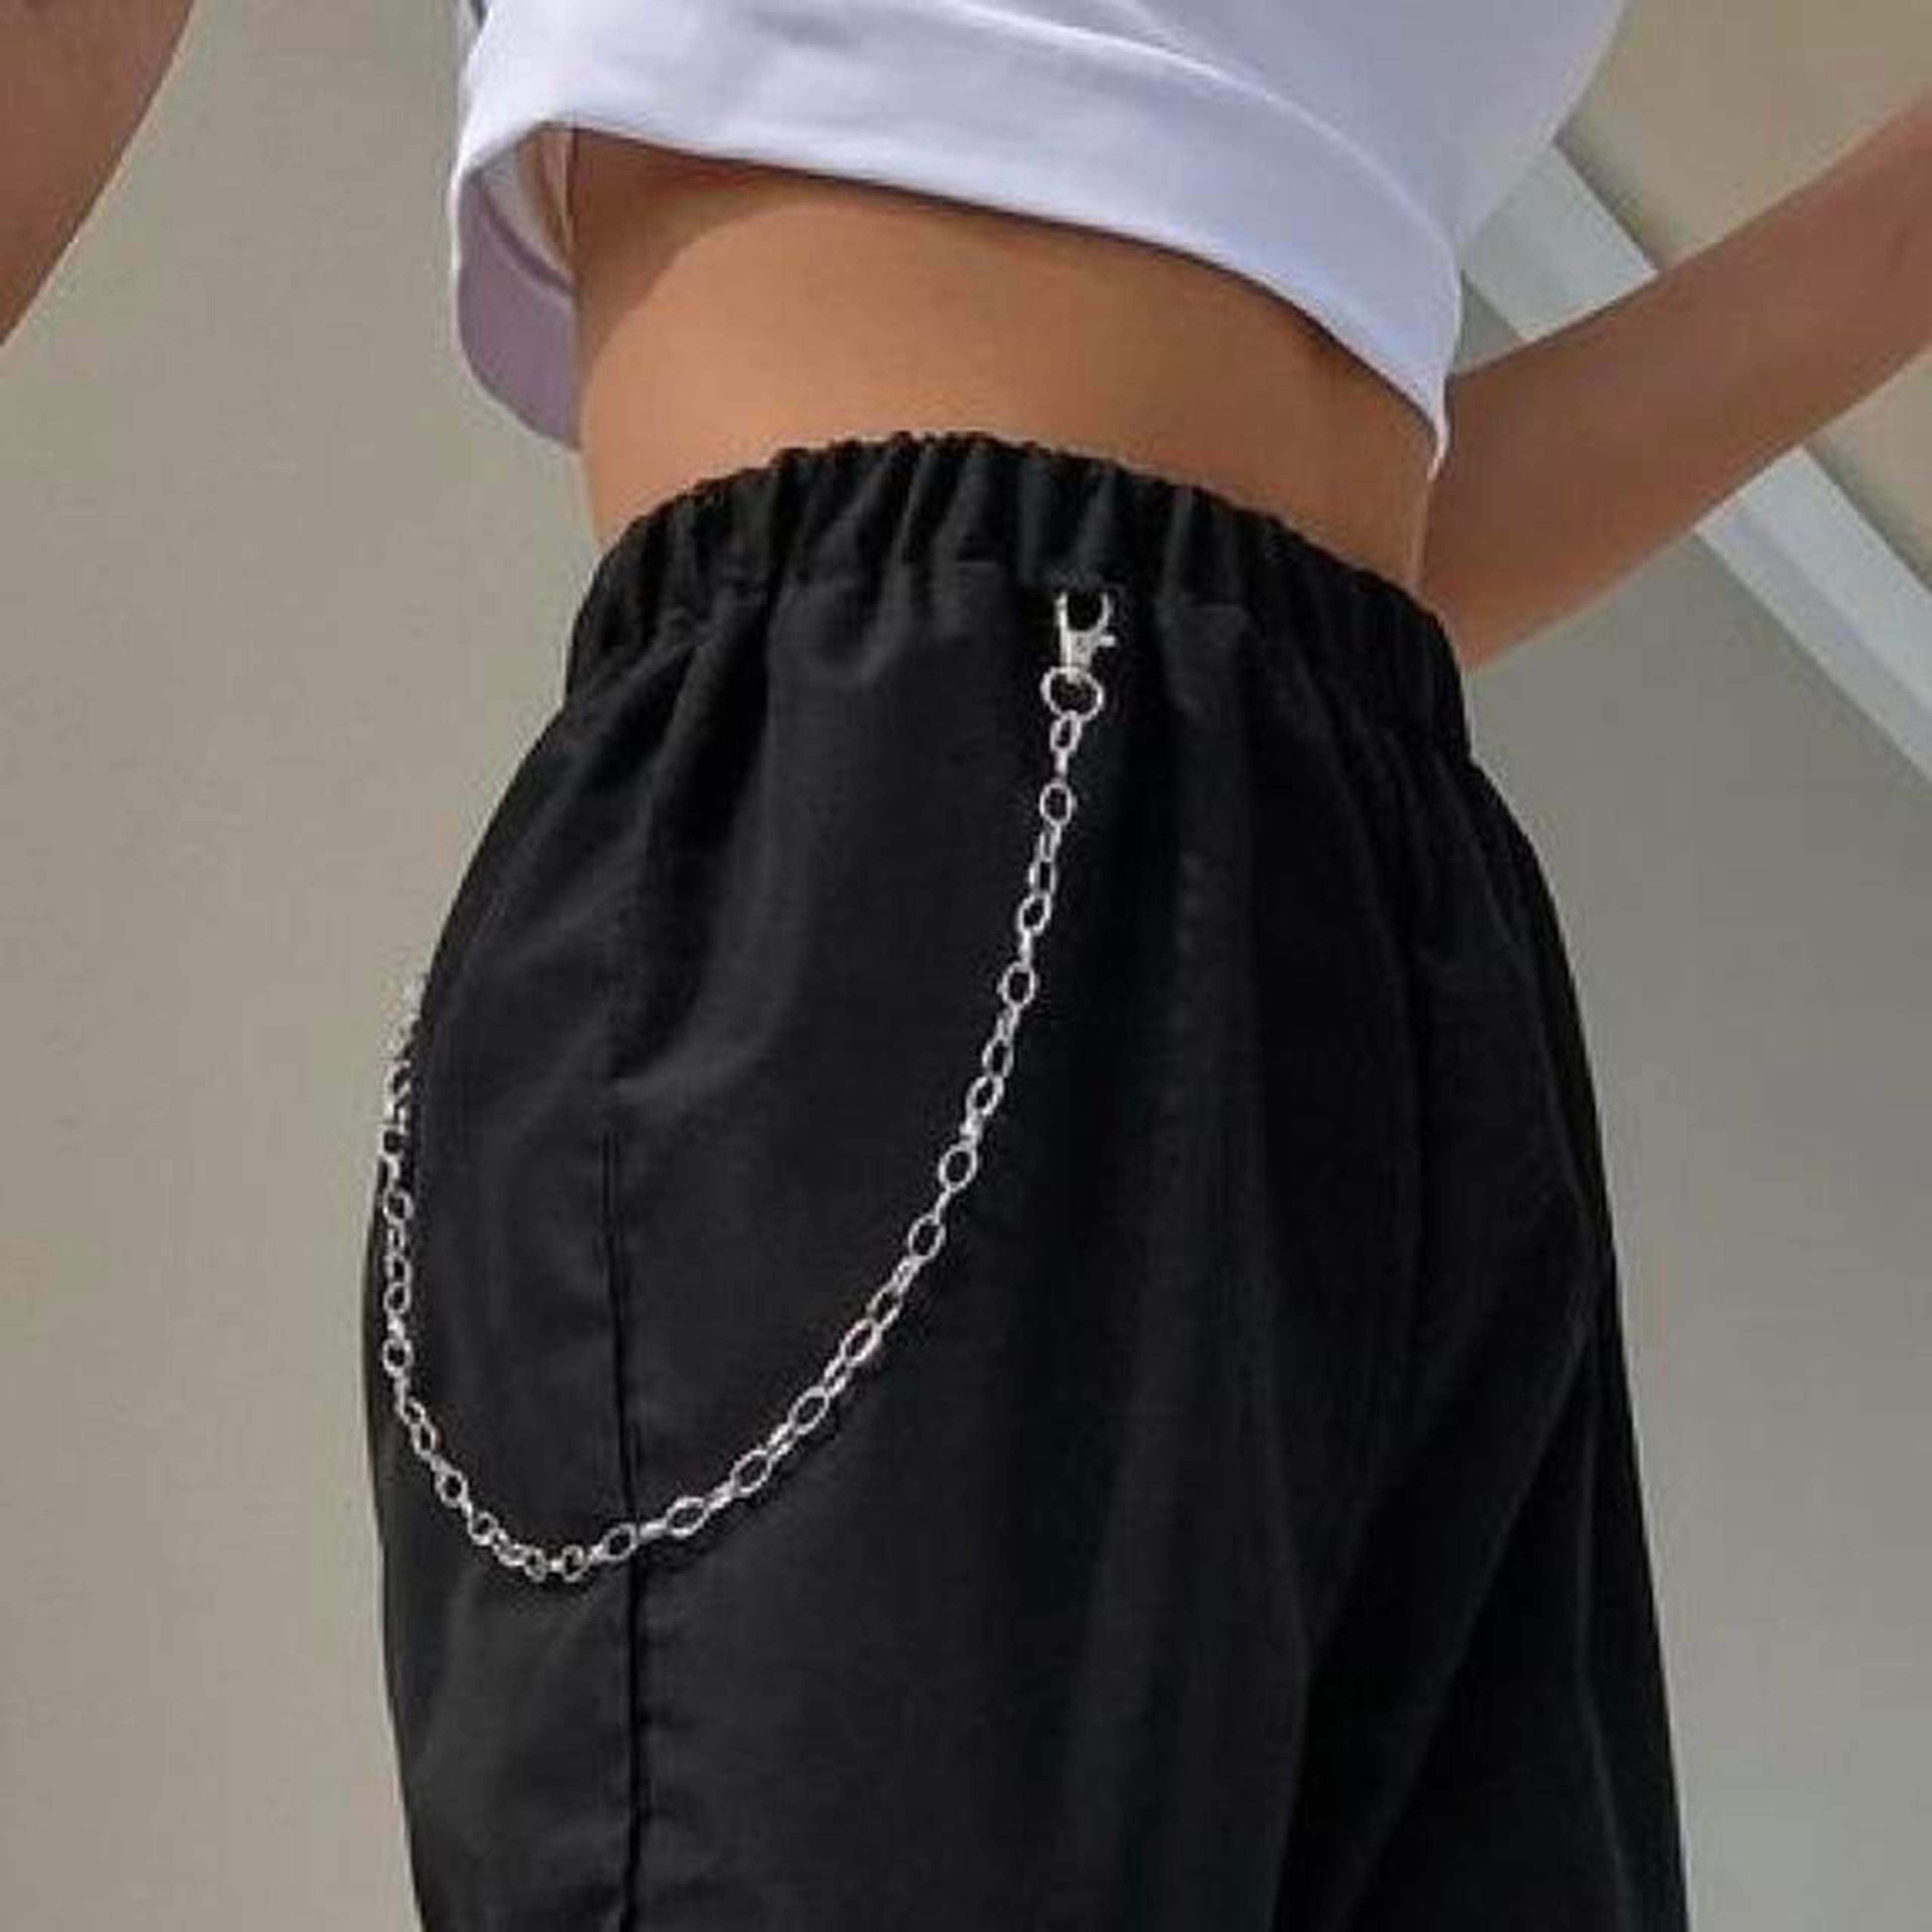 pant chain bought from tilly’s! super cute for any... - Depop